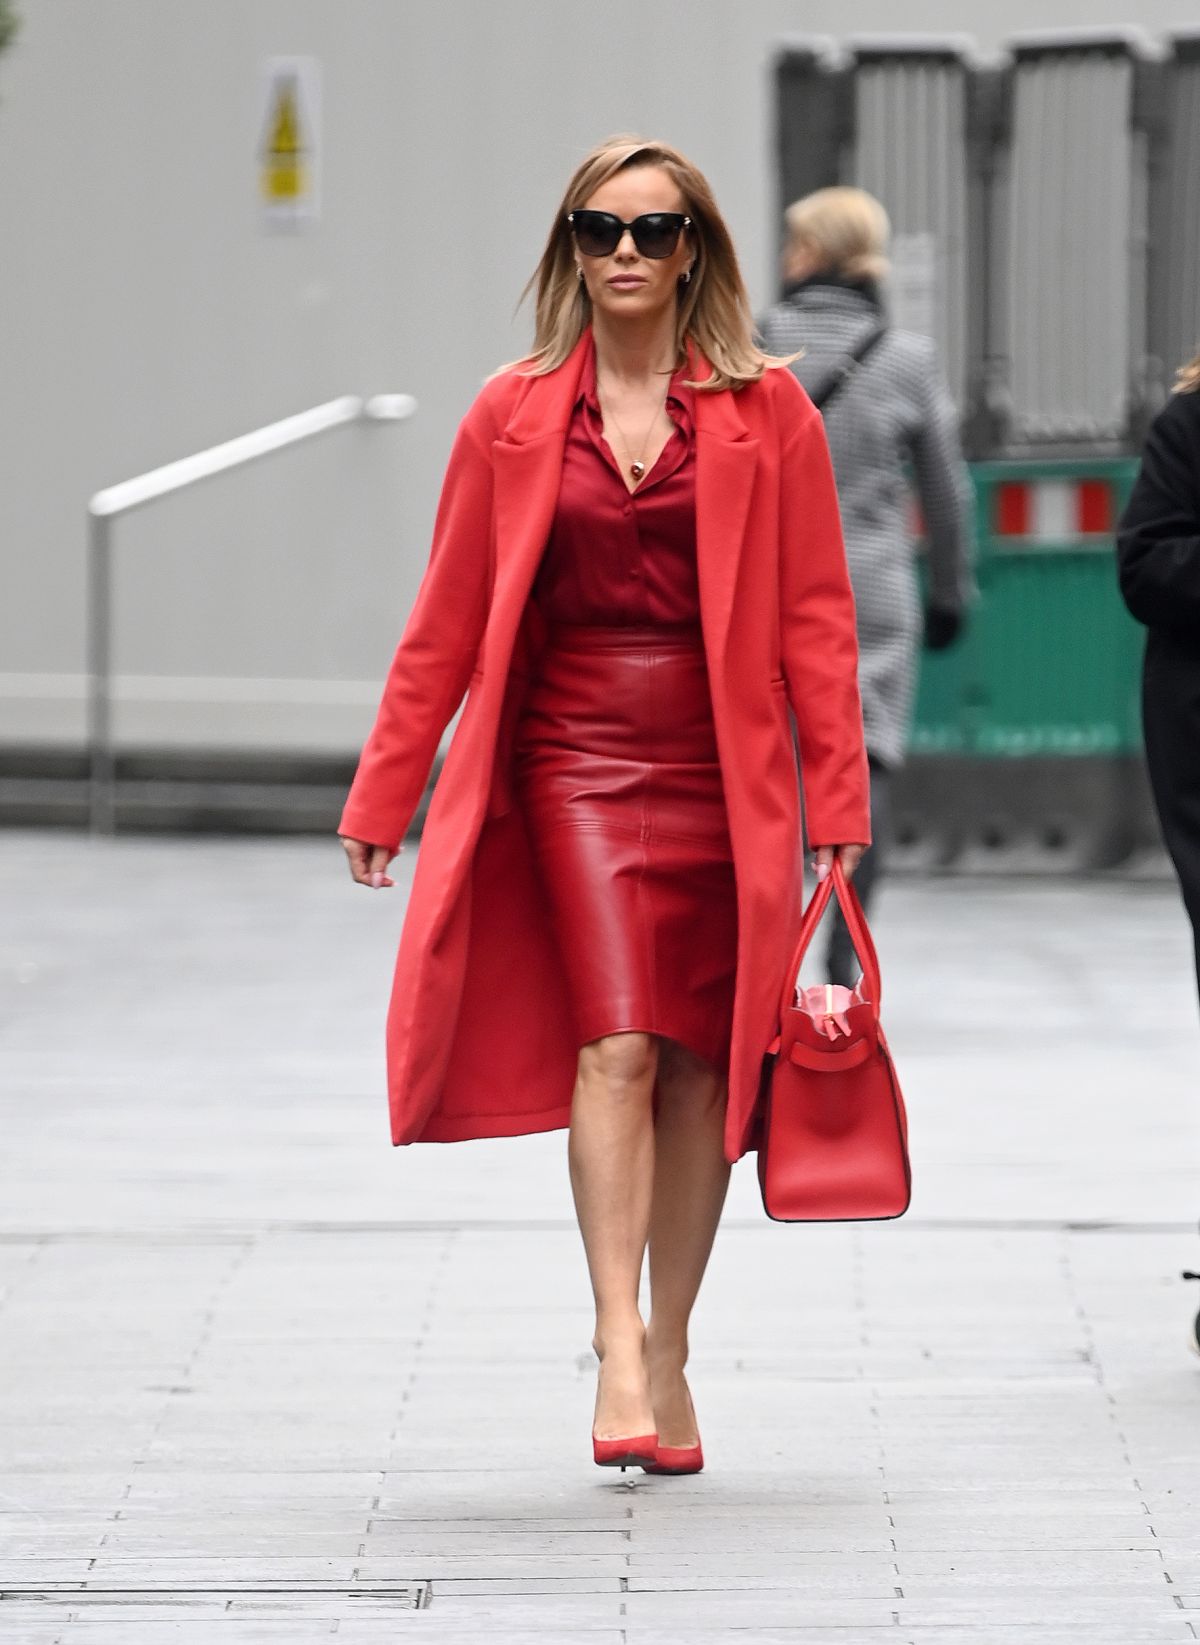 AMANDA HOLDEN All in Red at Global Radio in London 12/09/2020 – HawtCelebs